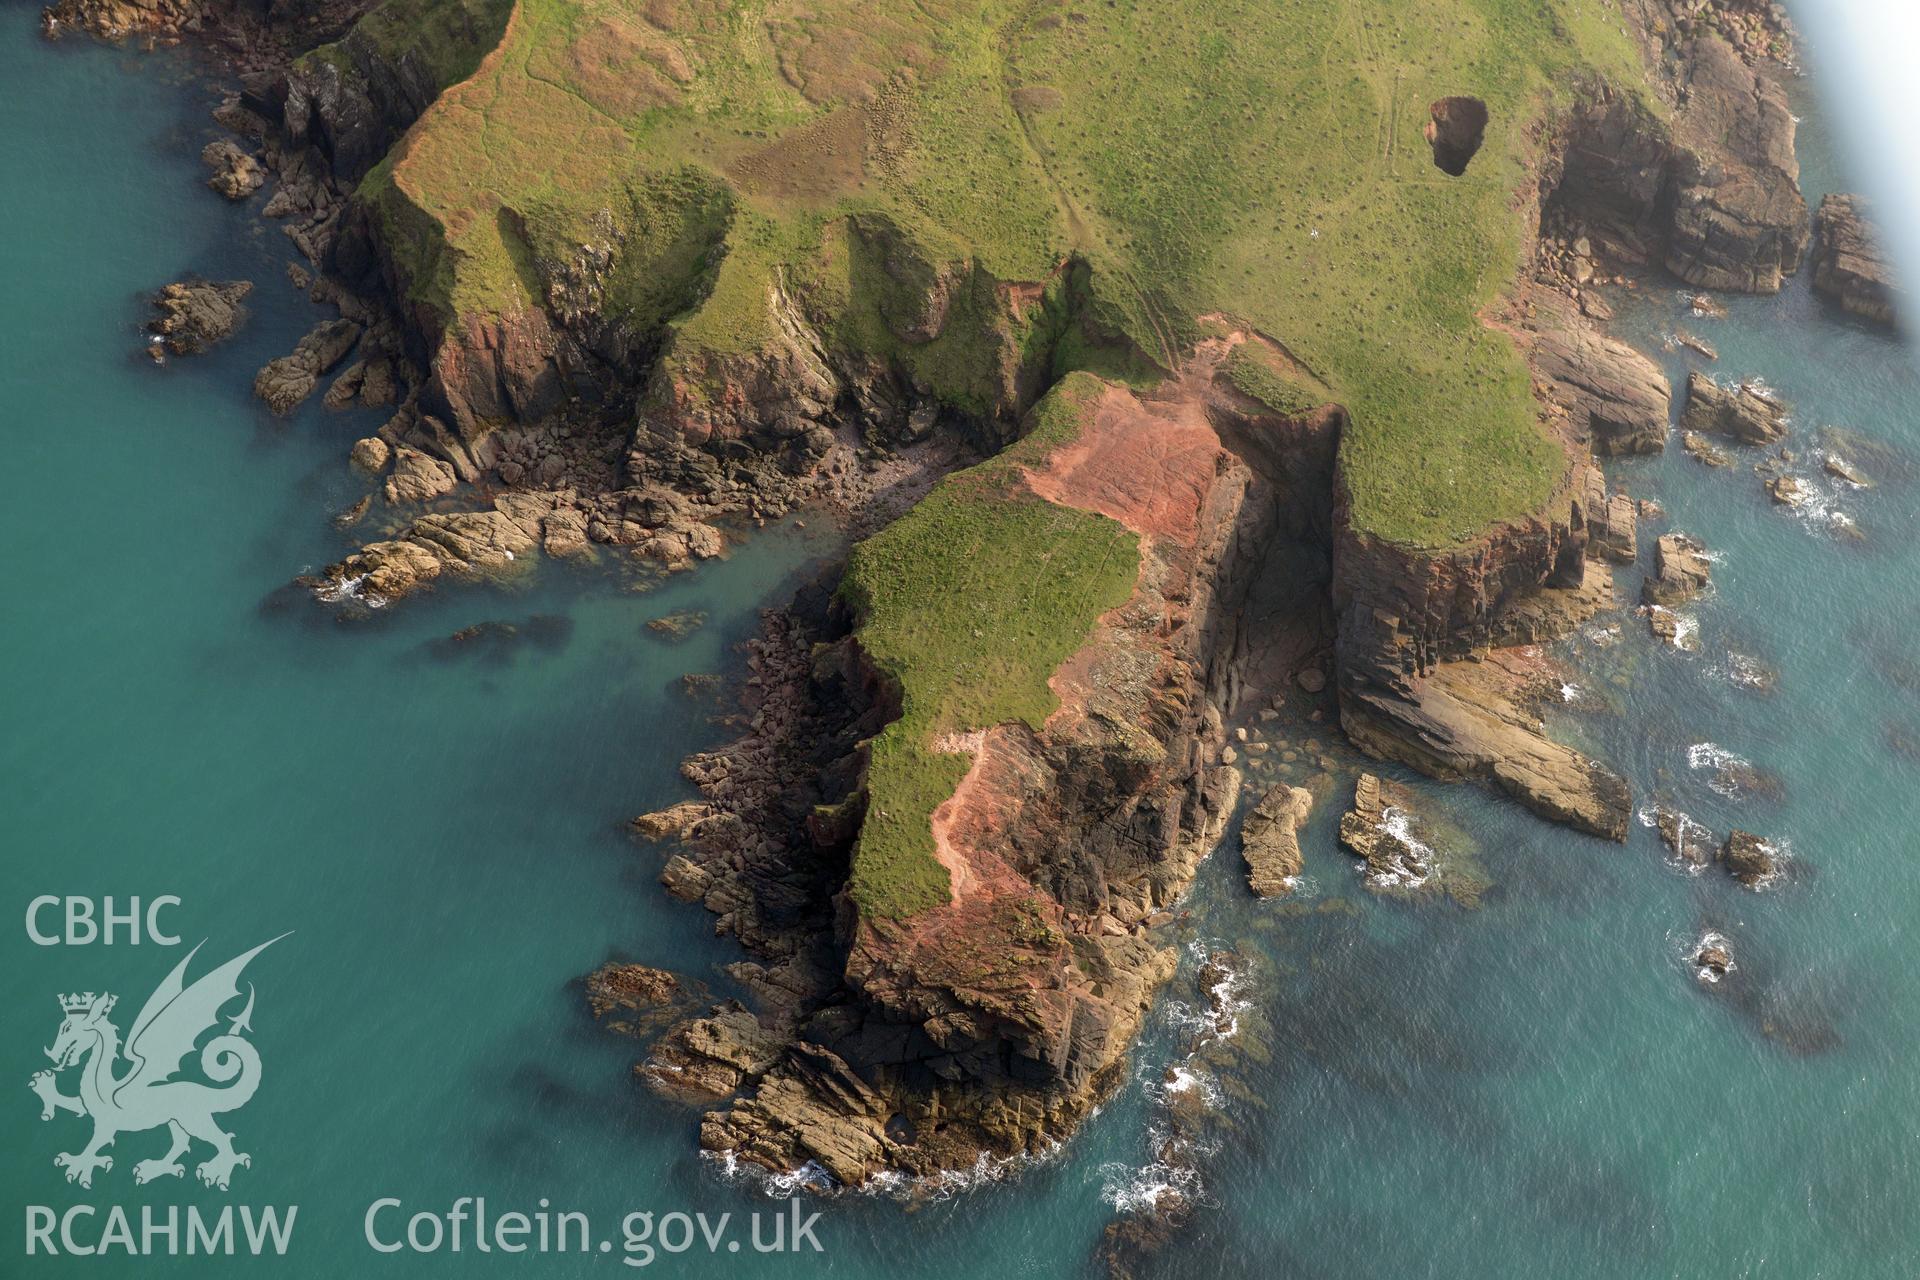 Aerial photography of The Nab Head taken on 27th March 2017. Baseline aerial reconnaissance survey for the CHERISH Project. ? Crown: CHERISH PROJECT 2017. Produced with EU funds through the Ireland Wales Co-operation Programme 2014-2020. All material made freely available through the Open Government Licence.